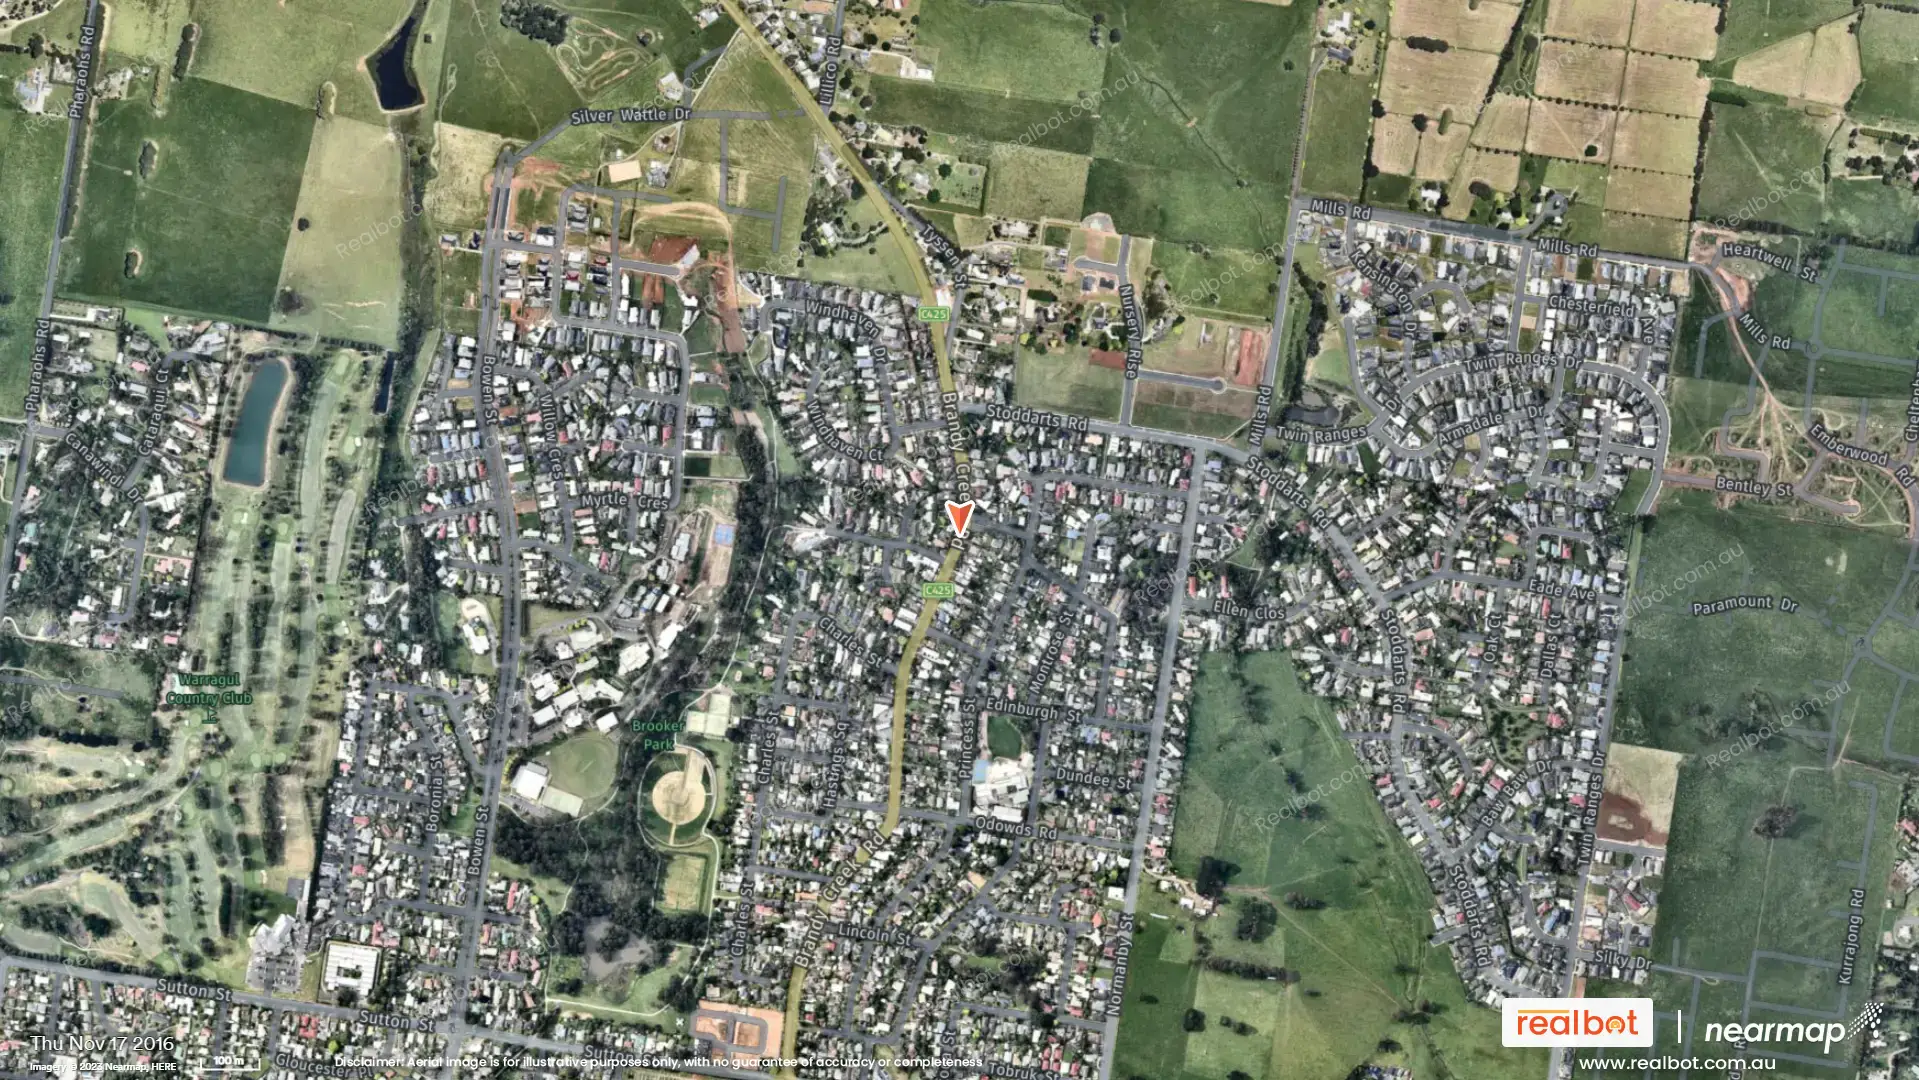 warragul-vic-3820-Suburb-Profile-And-Aerial-Images-Real-Search